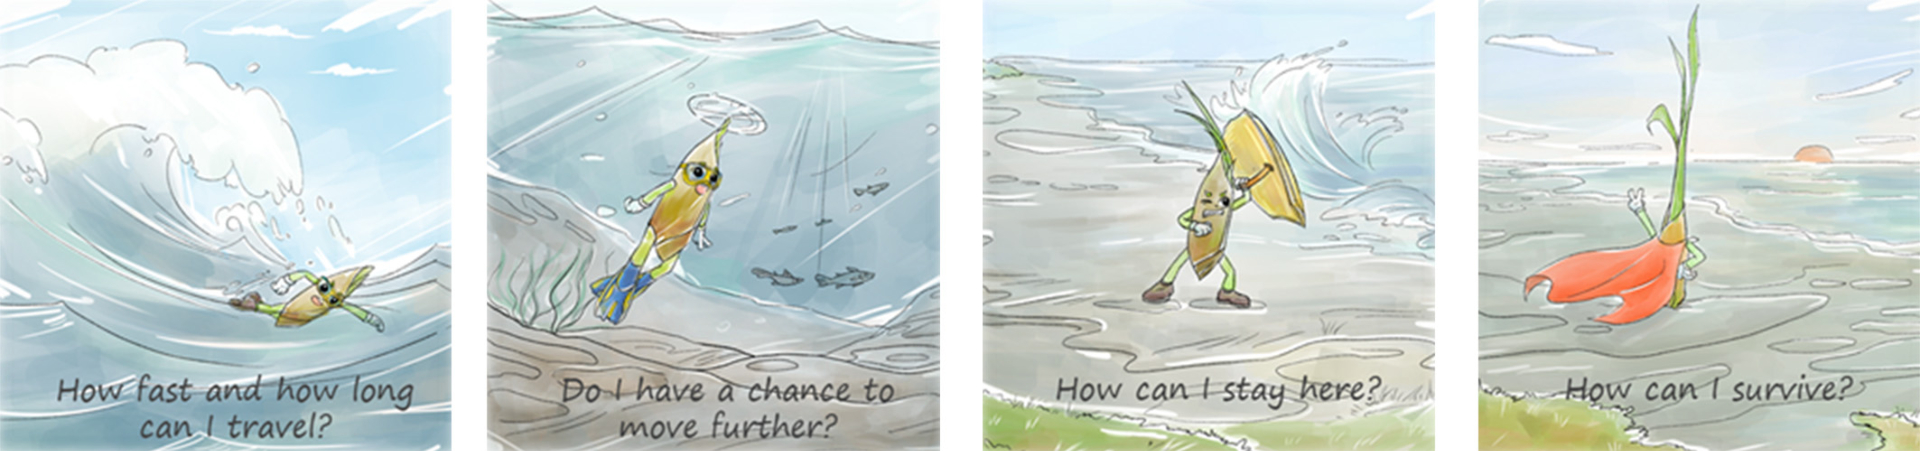 The cartoon shows the salt marsh seed as an adventurer and shows the adventure routes and major issues associated with this PhD research. Images by Zhiyuan Zhoa, NIOZ.